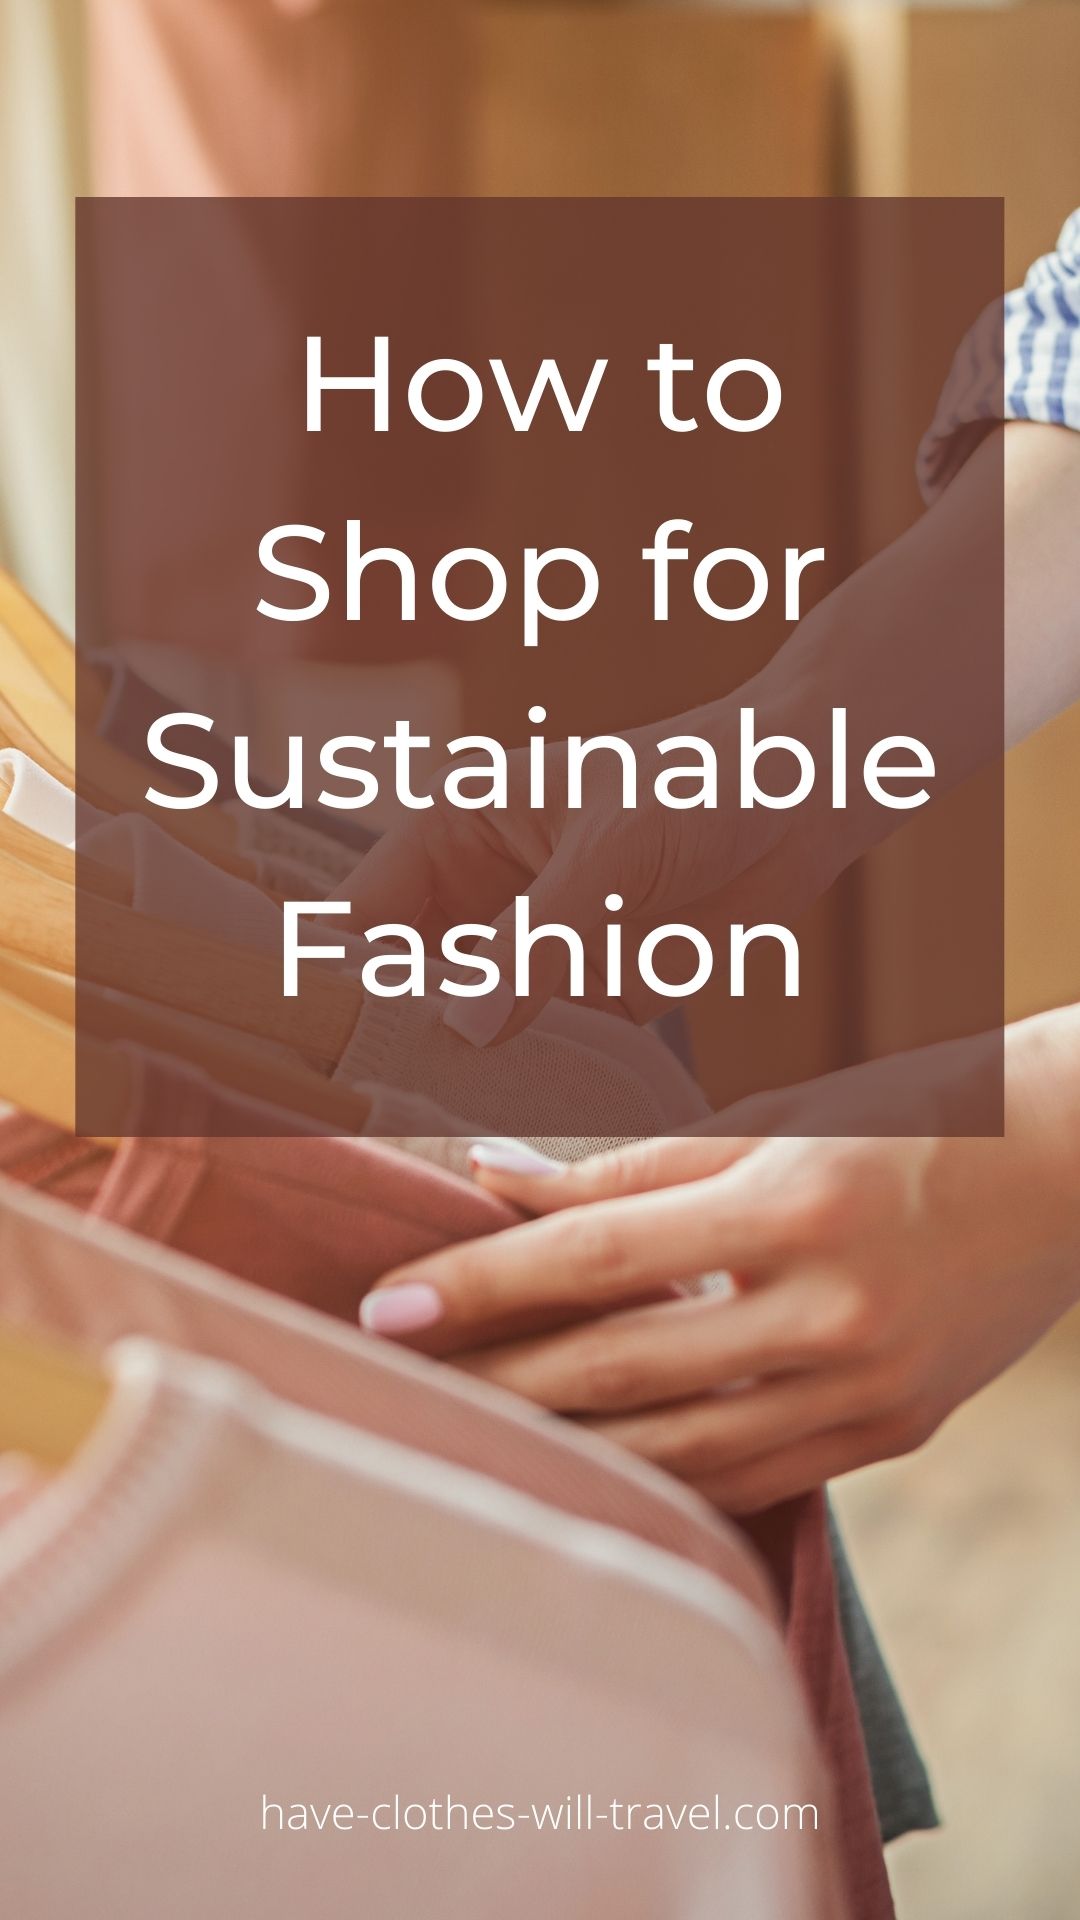 A Pinterest style image with a background image of a woman looking through a rack of clothing. Text across the image says "how to shop for sustainable fashion"